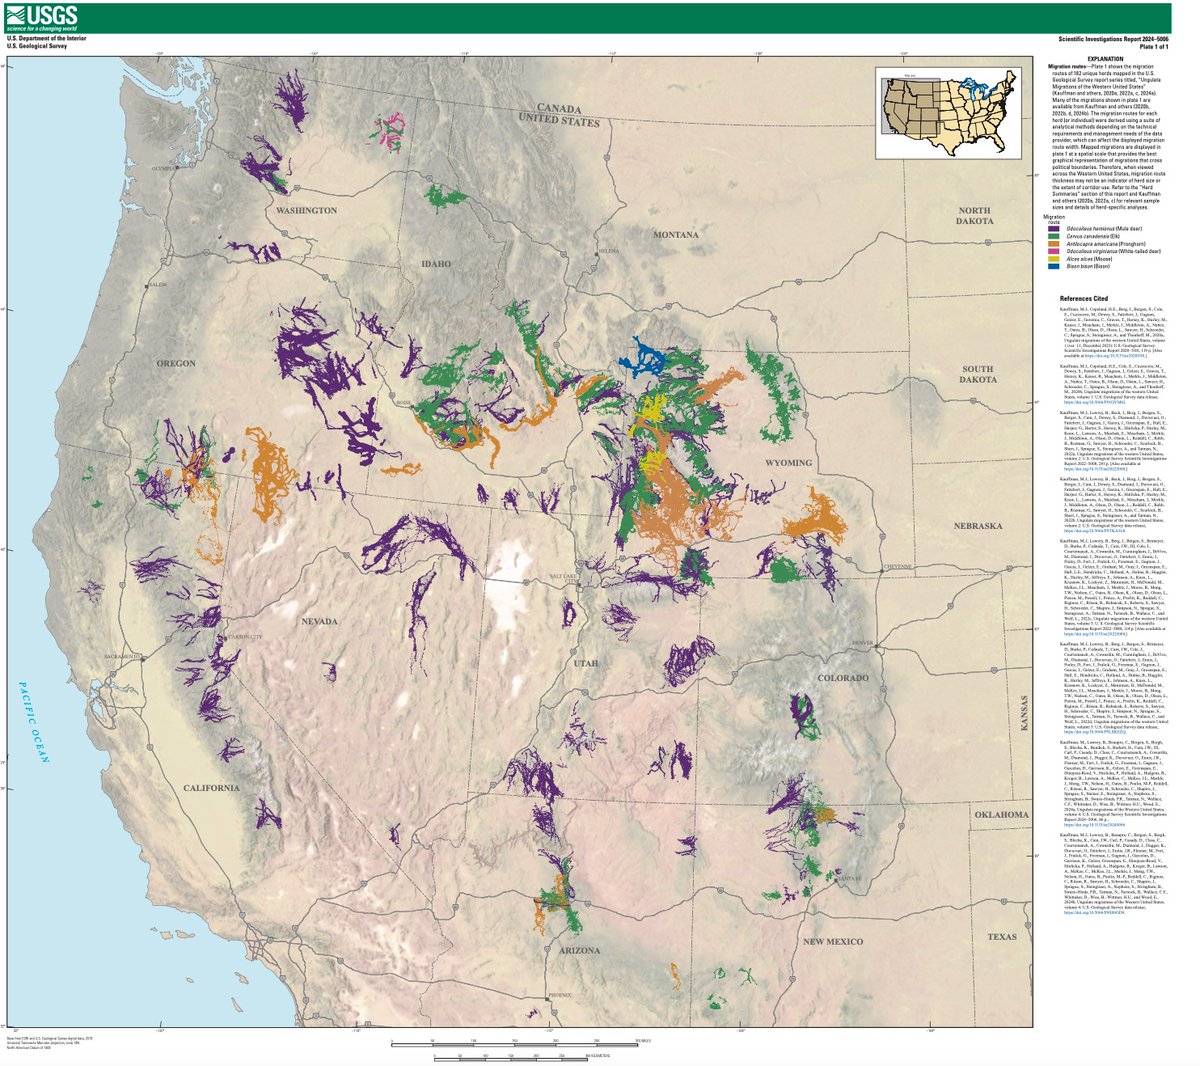 Look at all those ungulates moving across the West! New westwide map now published in Vol4 of our @USGS report. Map represents 182 herds of pronghorn, mule deer, elk, and other spp, plus a lot of work from our many State, Tribal and Federal partners. usgs.gov/news/national-…